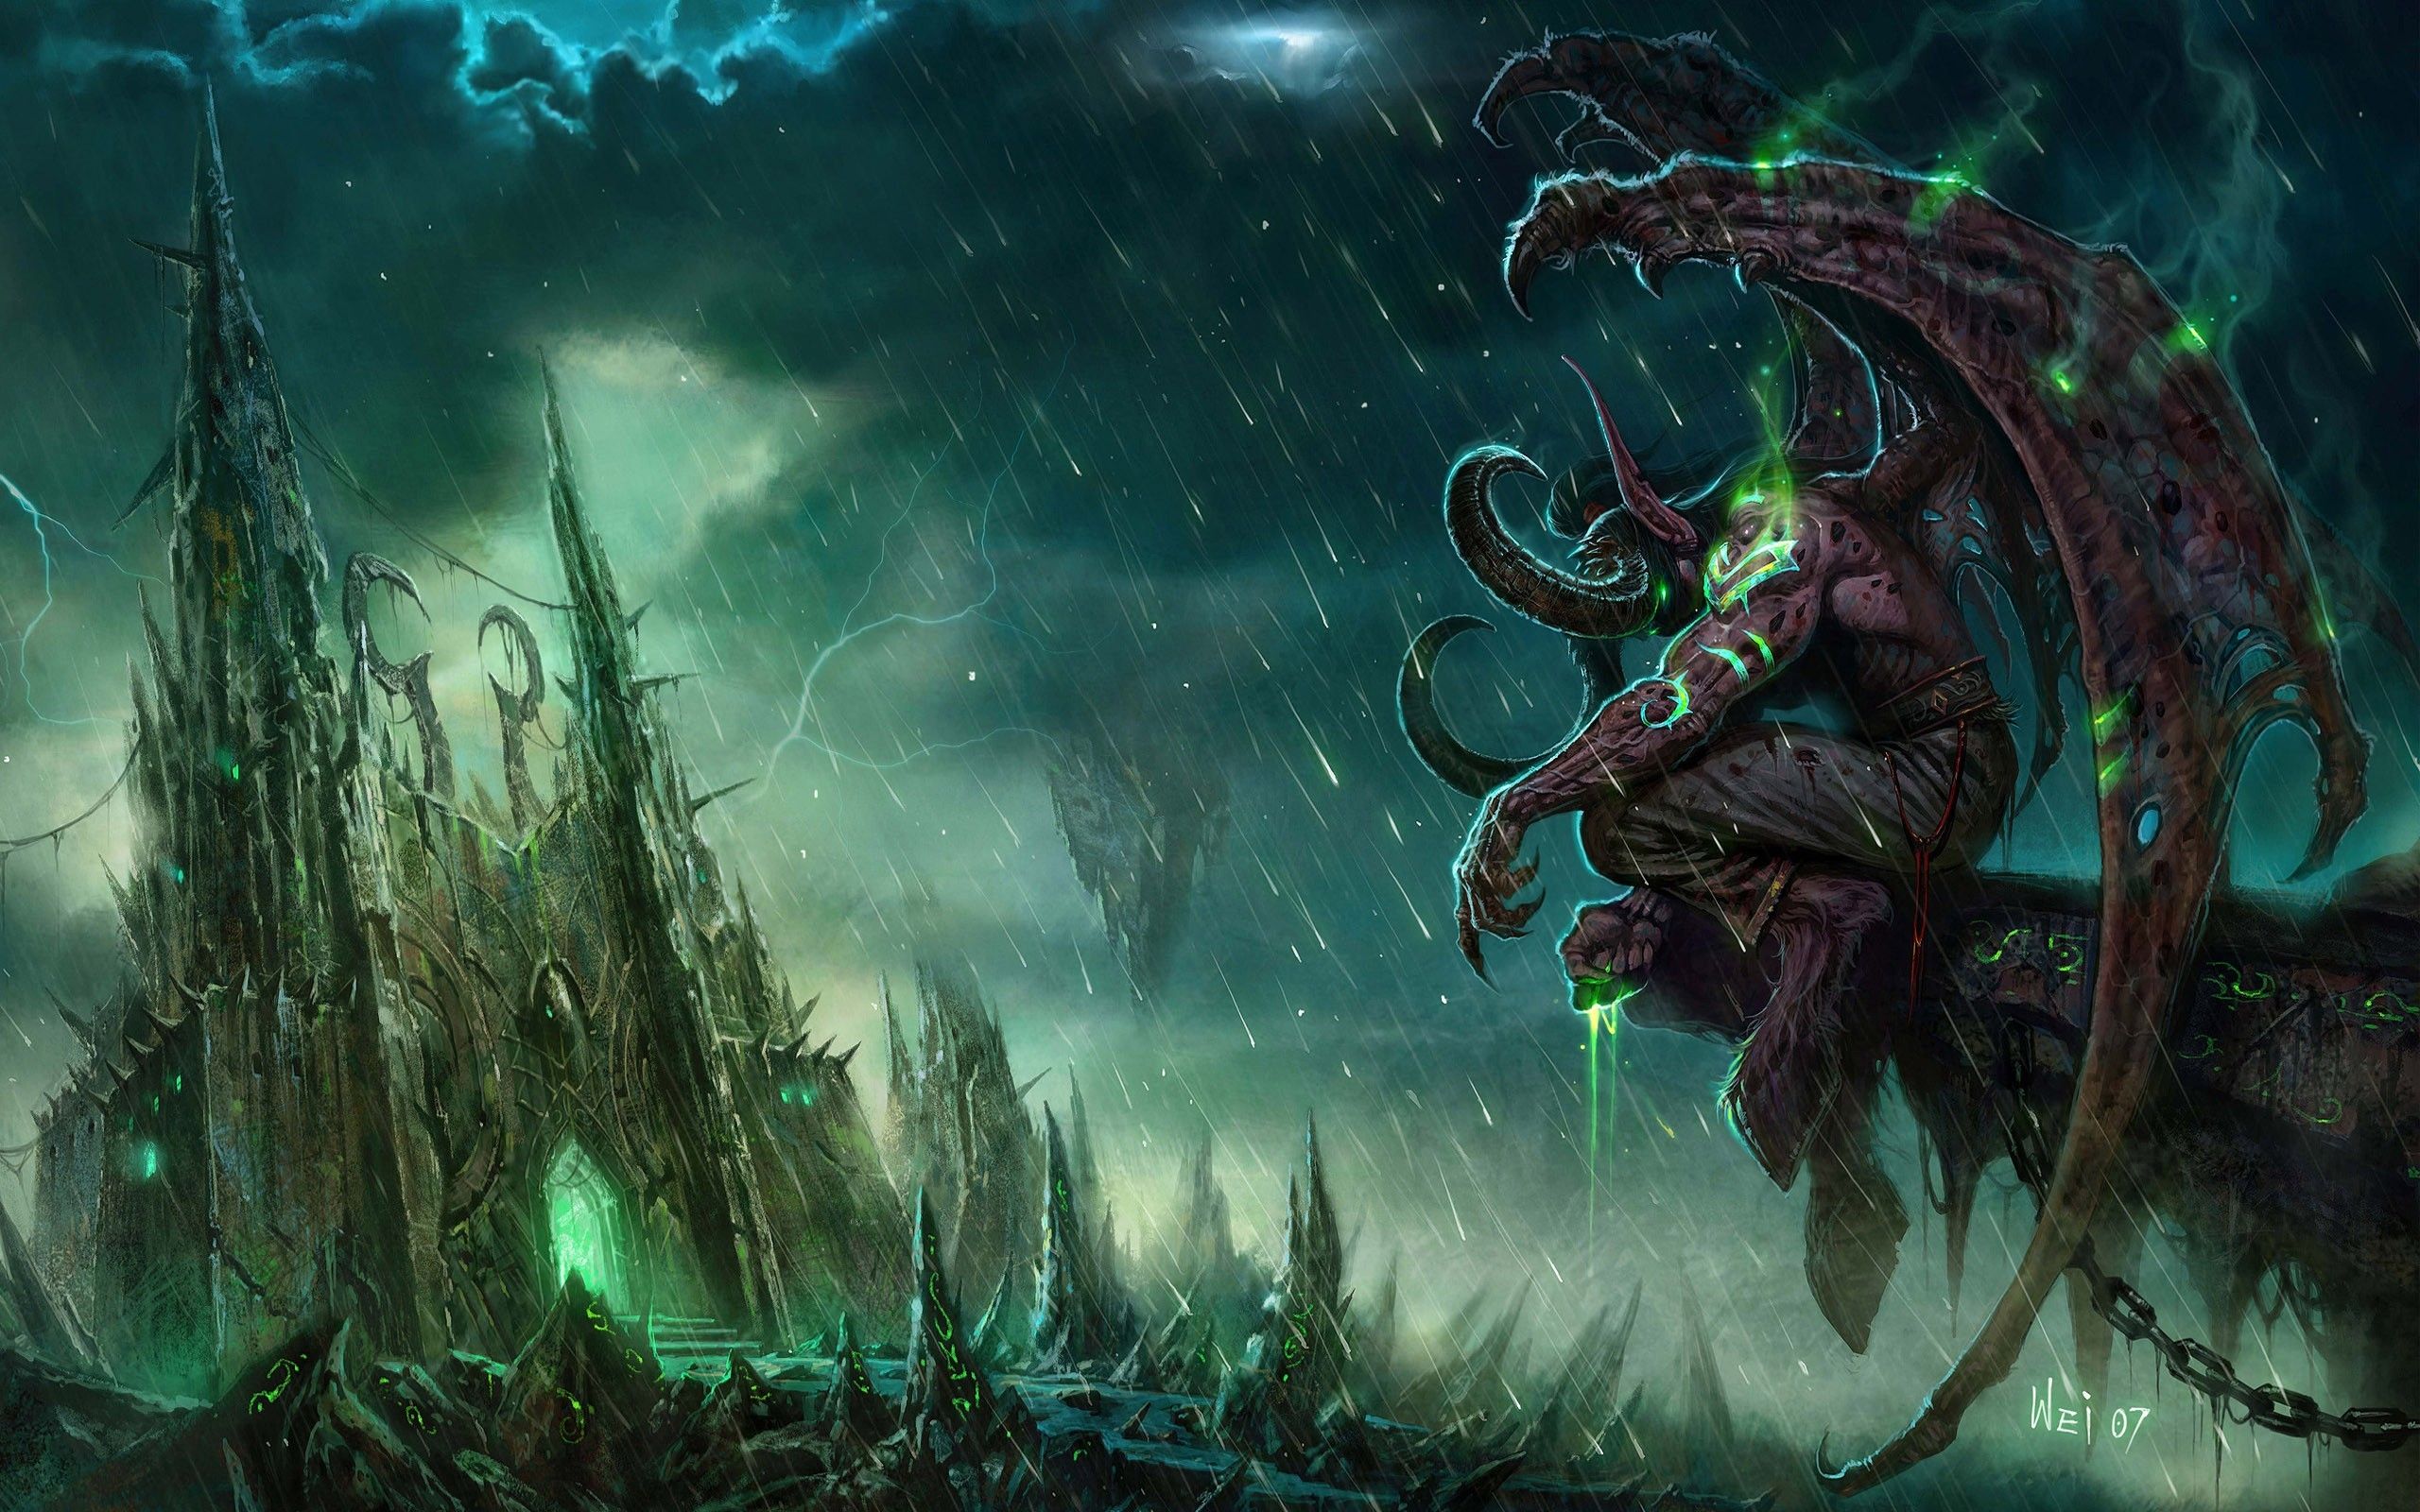 Download wallpaper Illidan, warrior, rain, World of Warcraft, monster, WoW for desktop with resolution 2560x1600. High Quality HD picture wallpaper